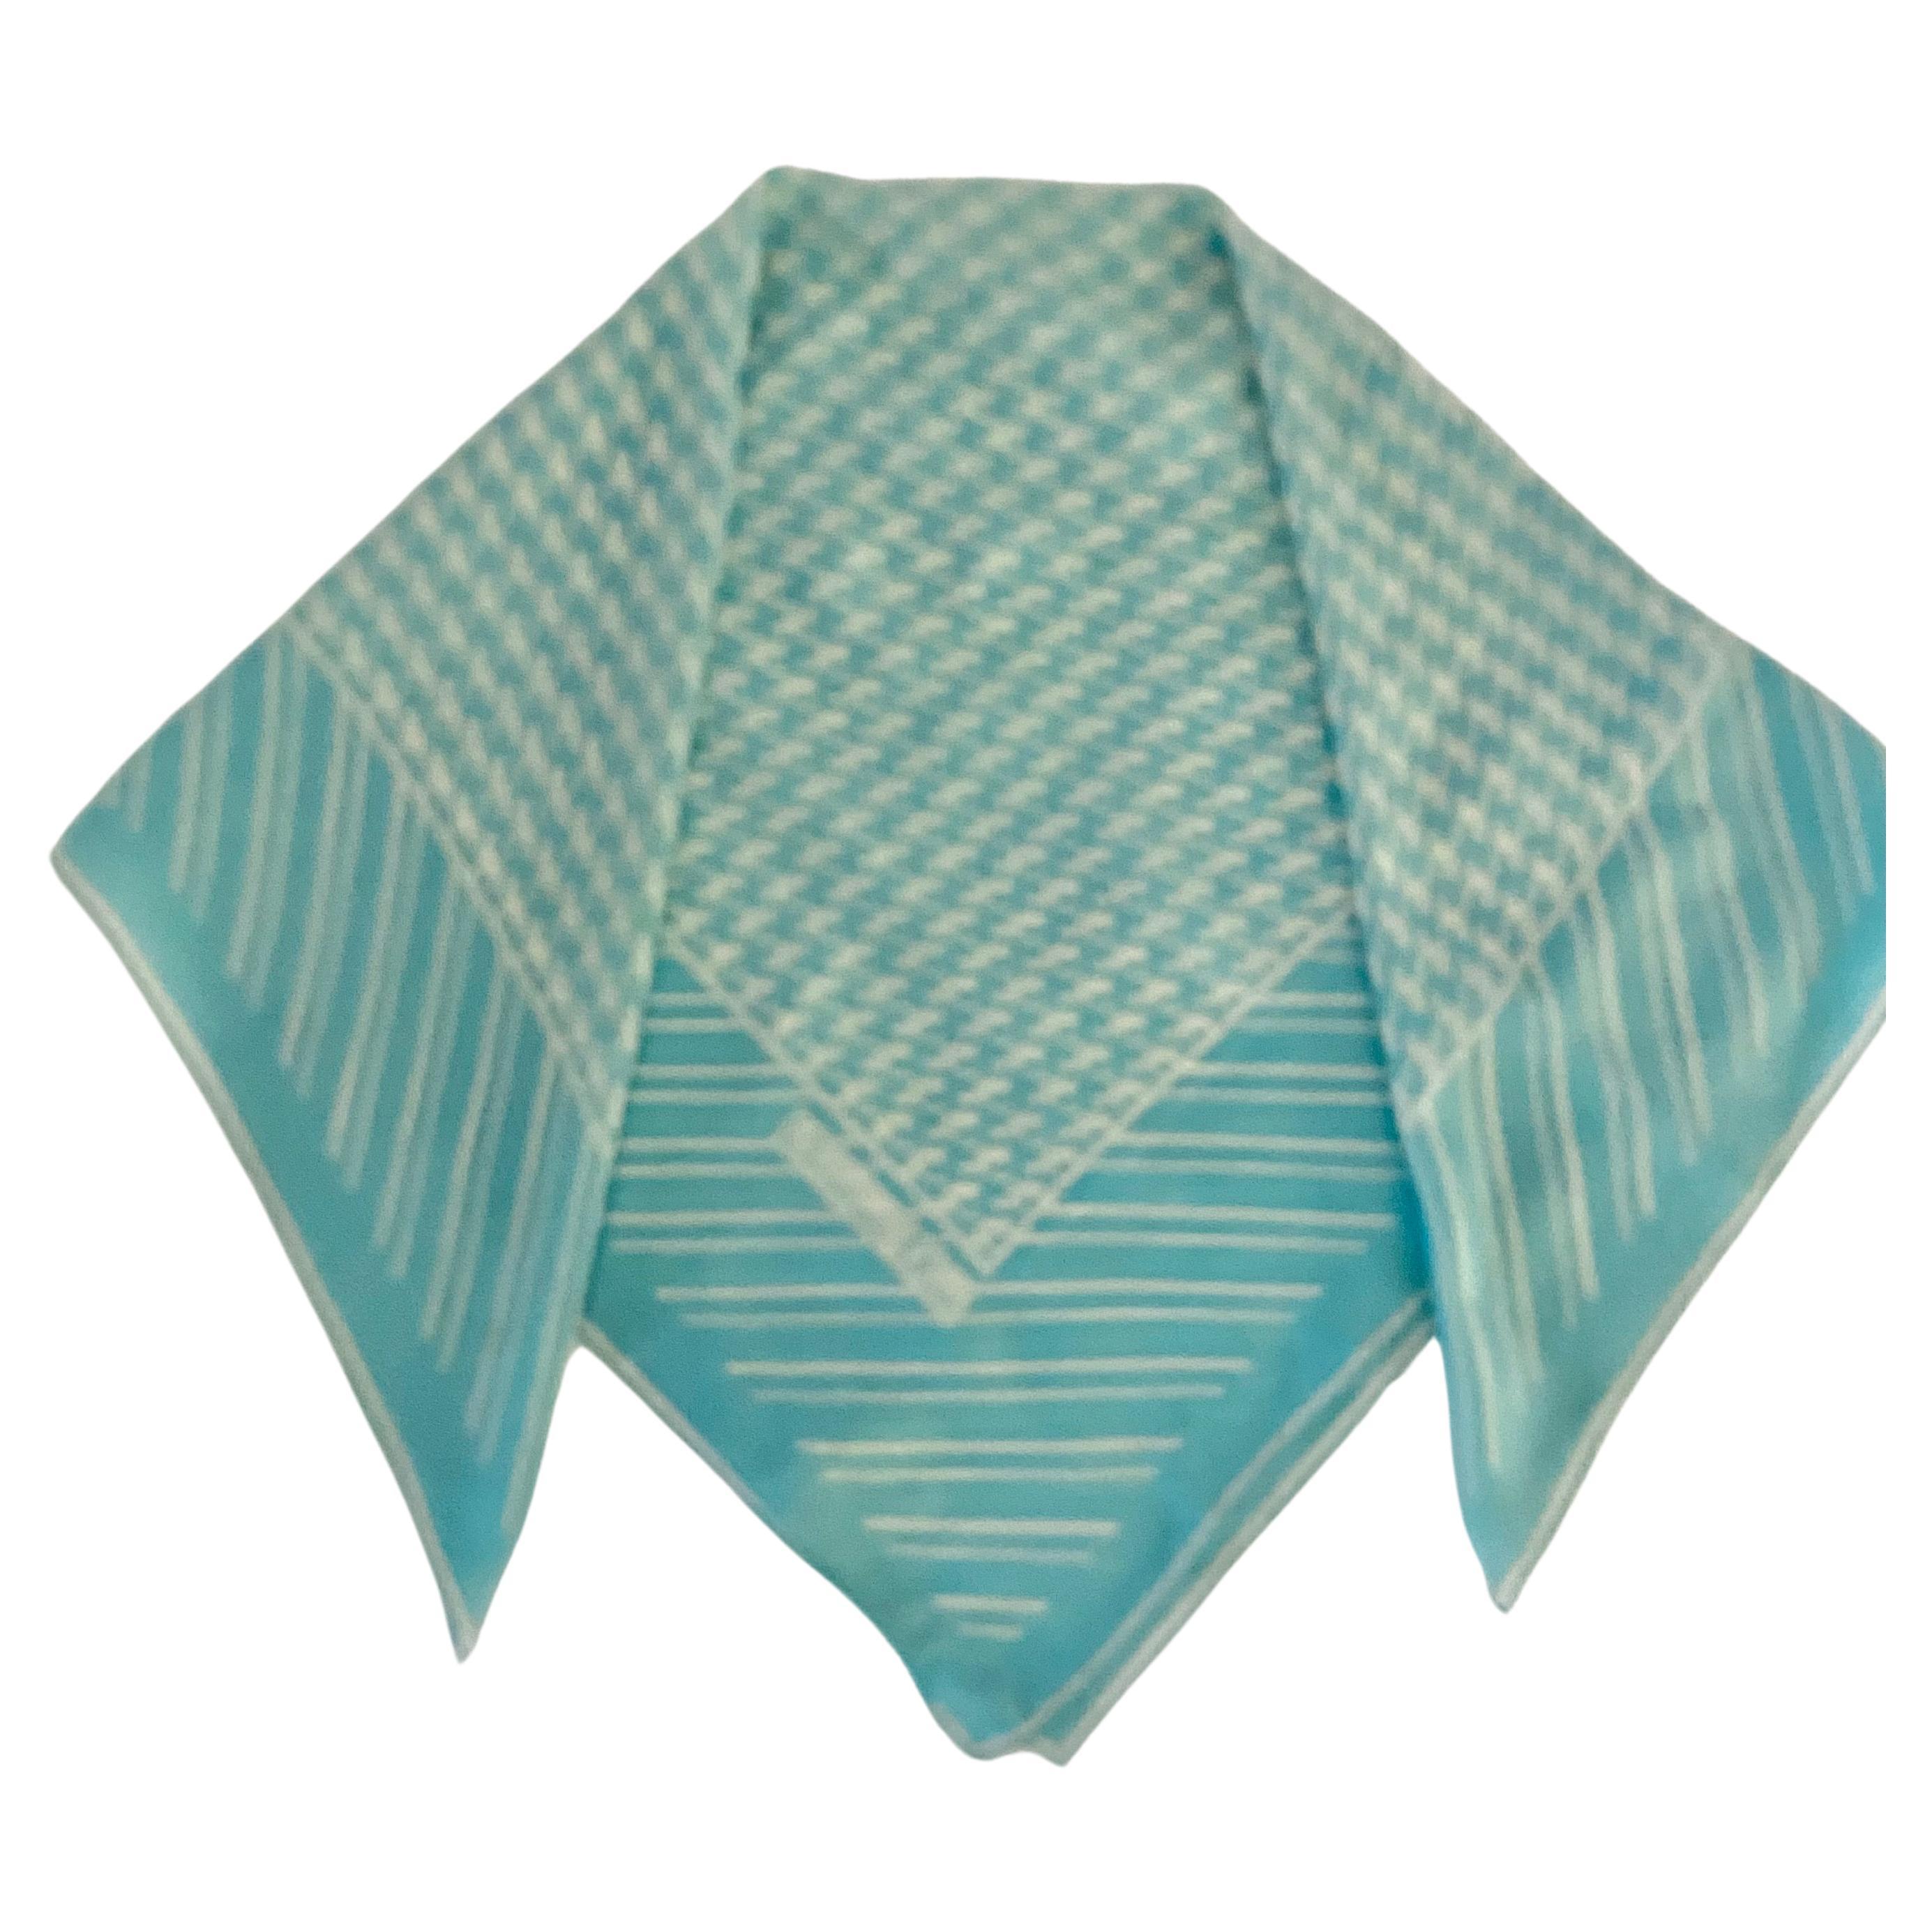 From the vintage '80s, this lavish houndstooth scarf made of 100% silk by renowned French designer Christian Dior is a luxurious delight. An exquisite light teal/turquoise hue and white stripes around the edge are graced with the signature Dior